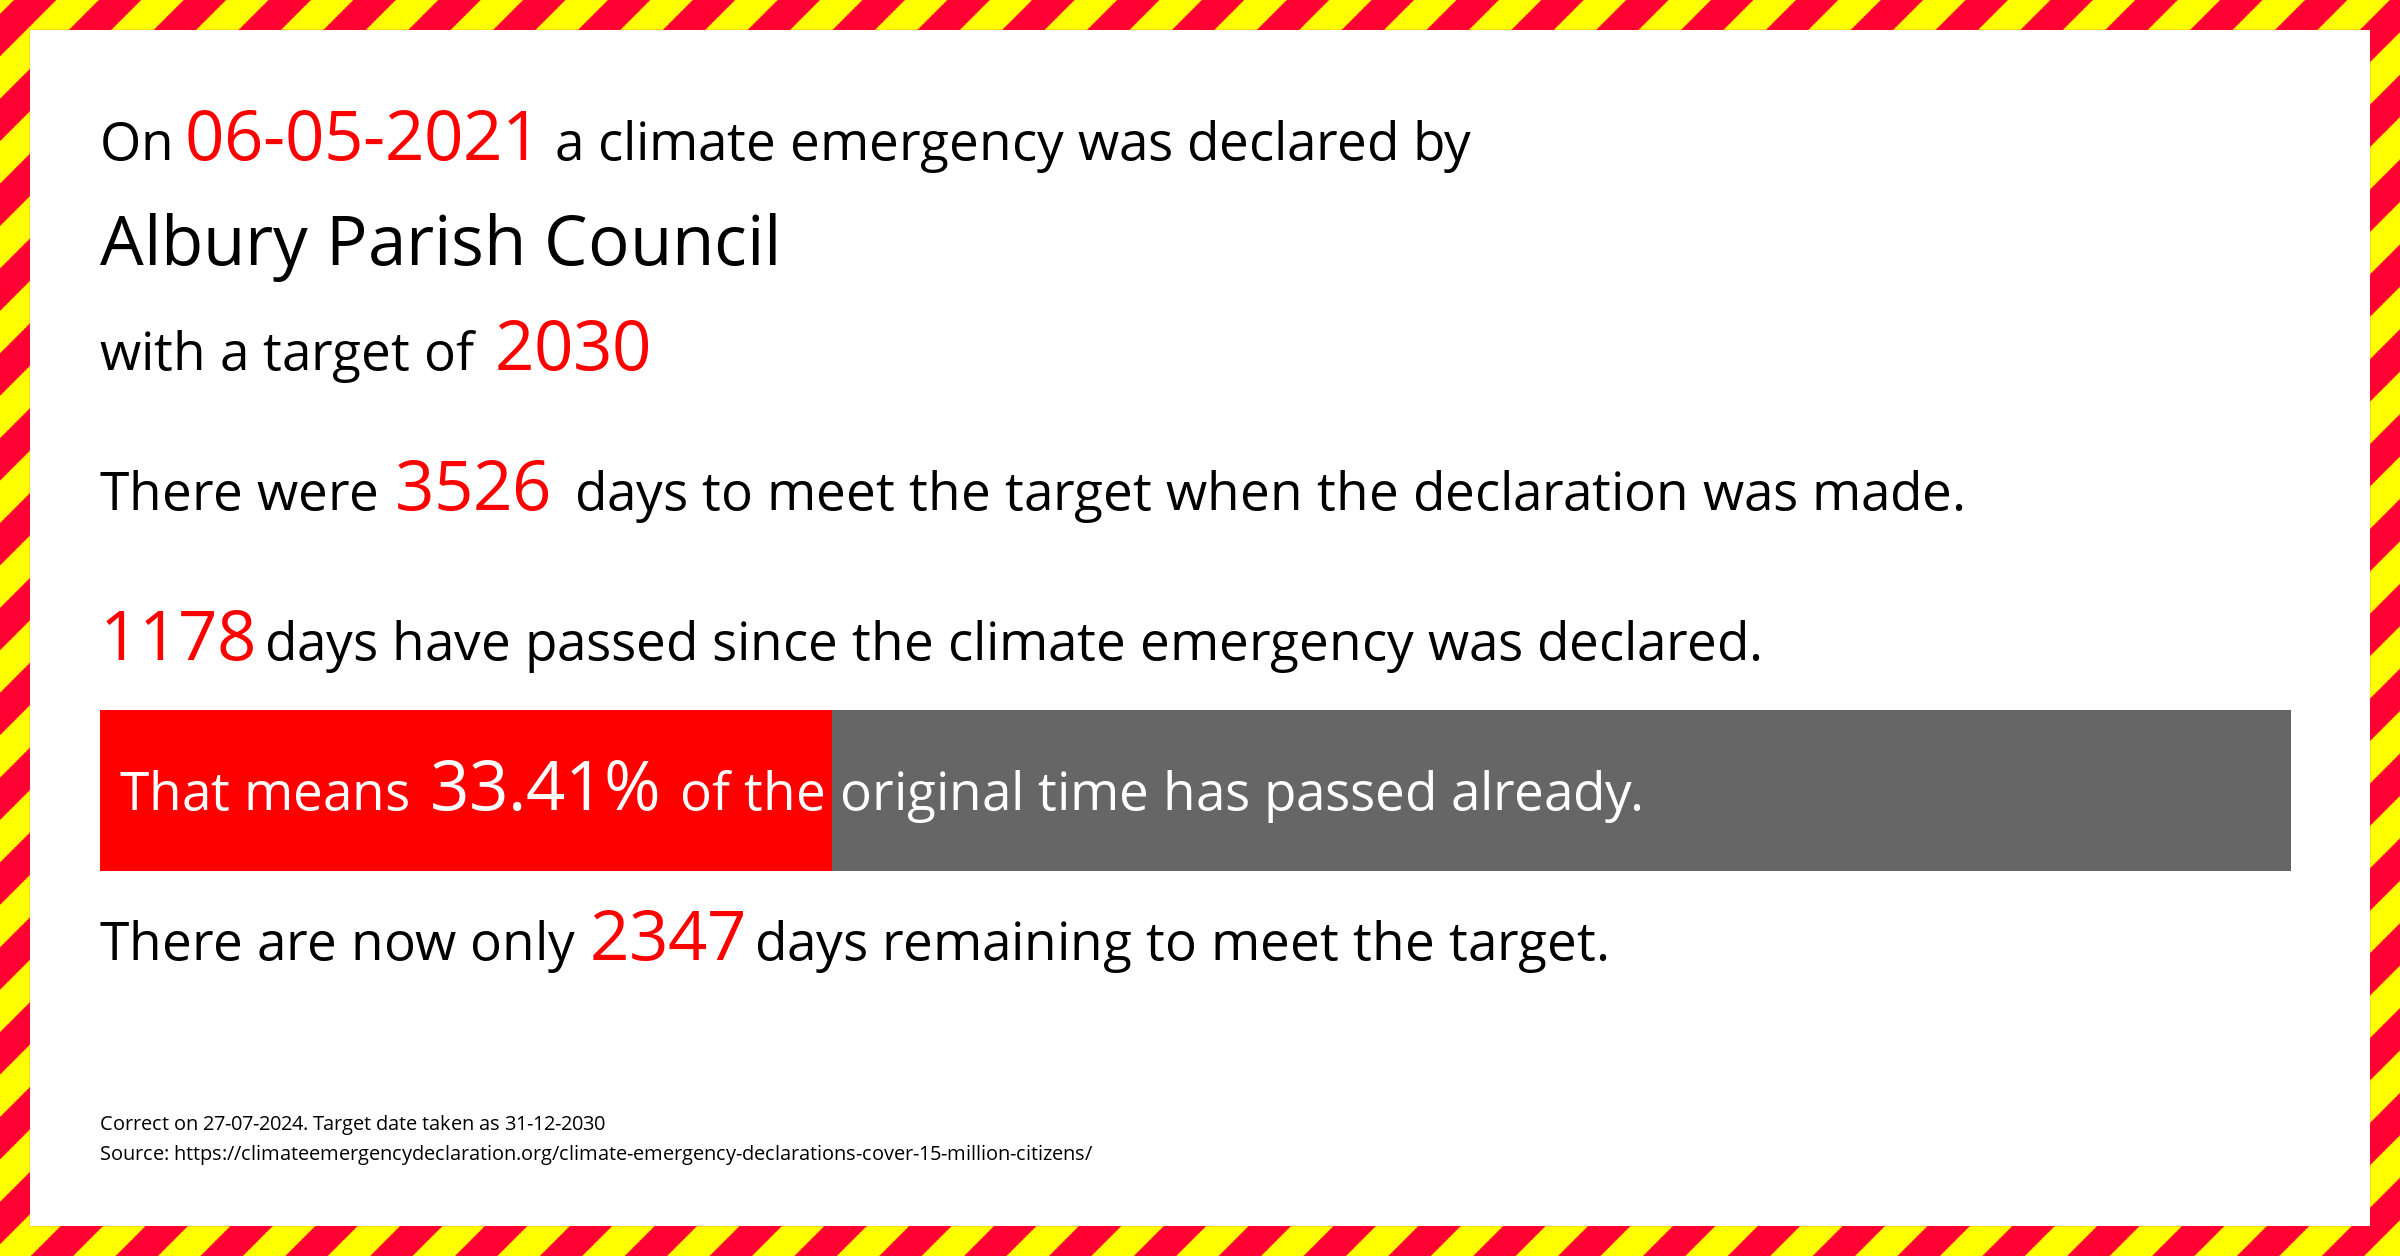 Albury Parish Council  declared a Climate emergency on Thursday 6th May 2021, with a target of 2030.